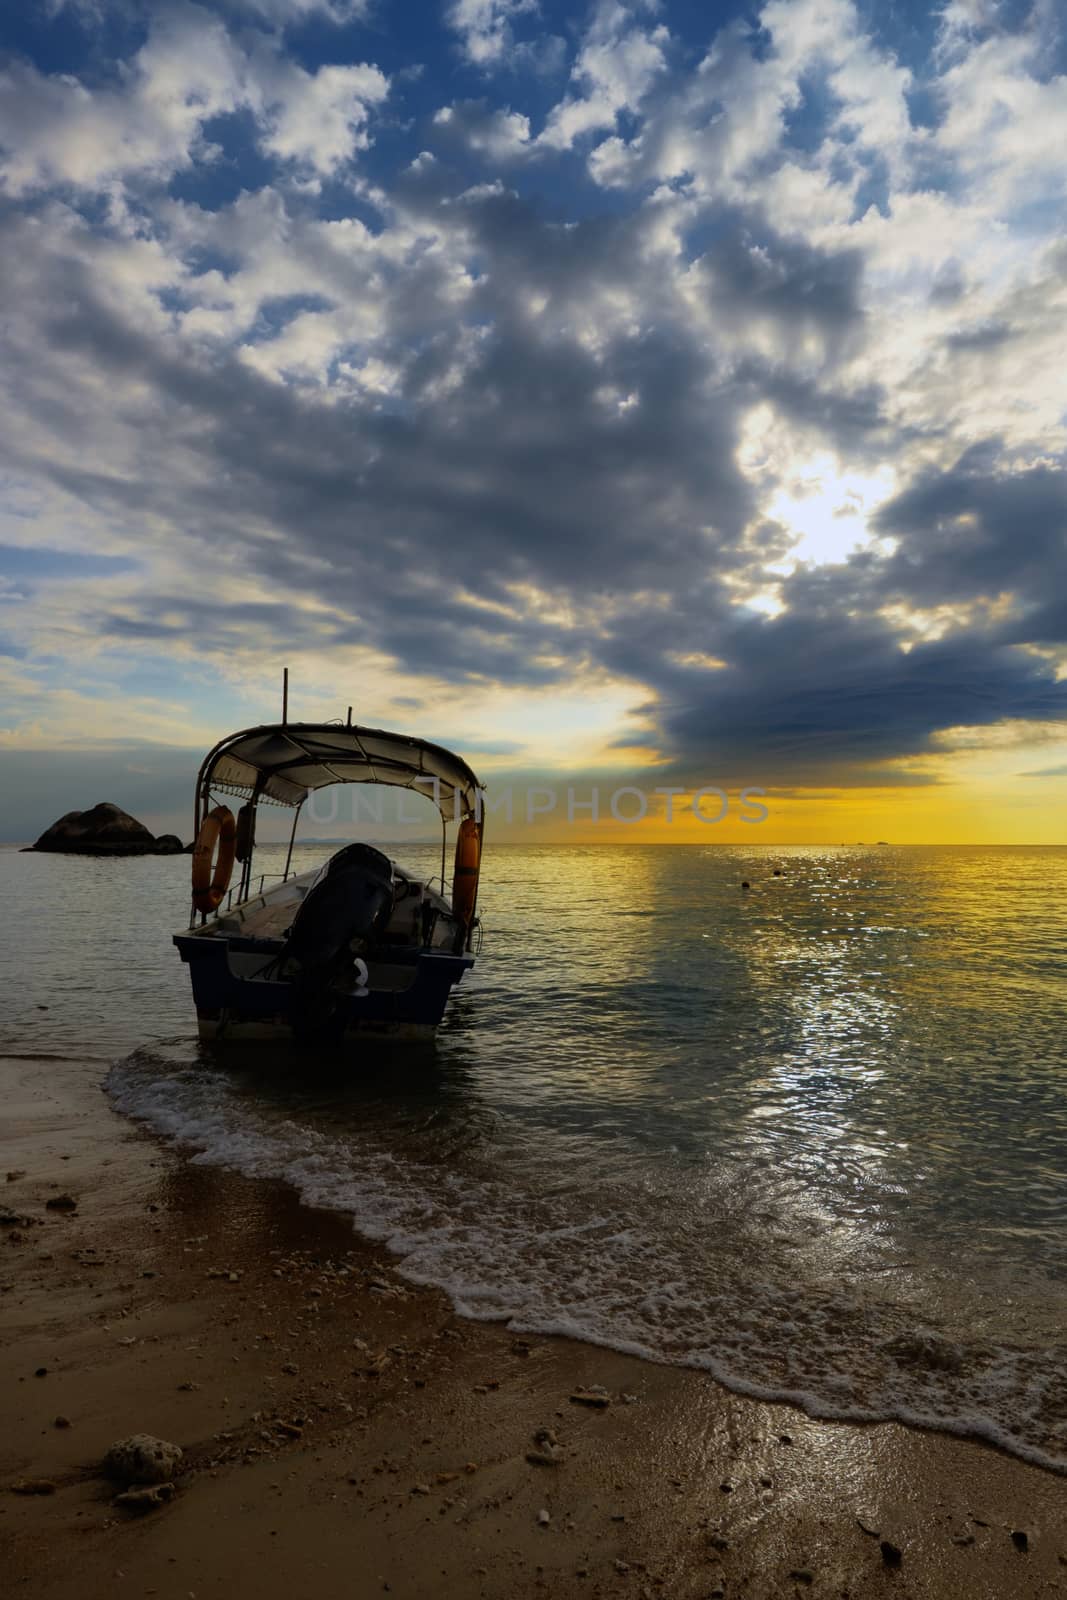 Boat silhouette in the sea at beautiful yellow blue cloudy sunse by rainfallsup